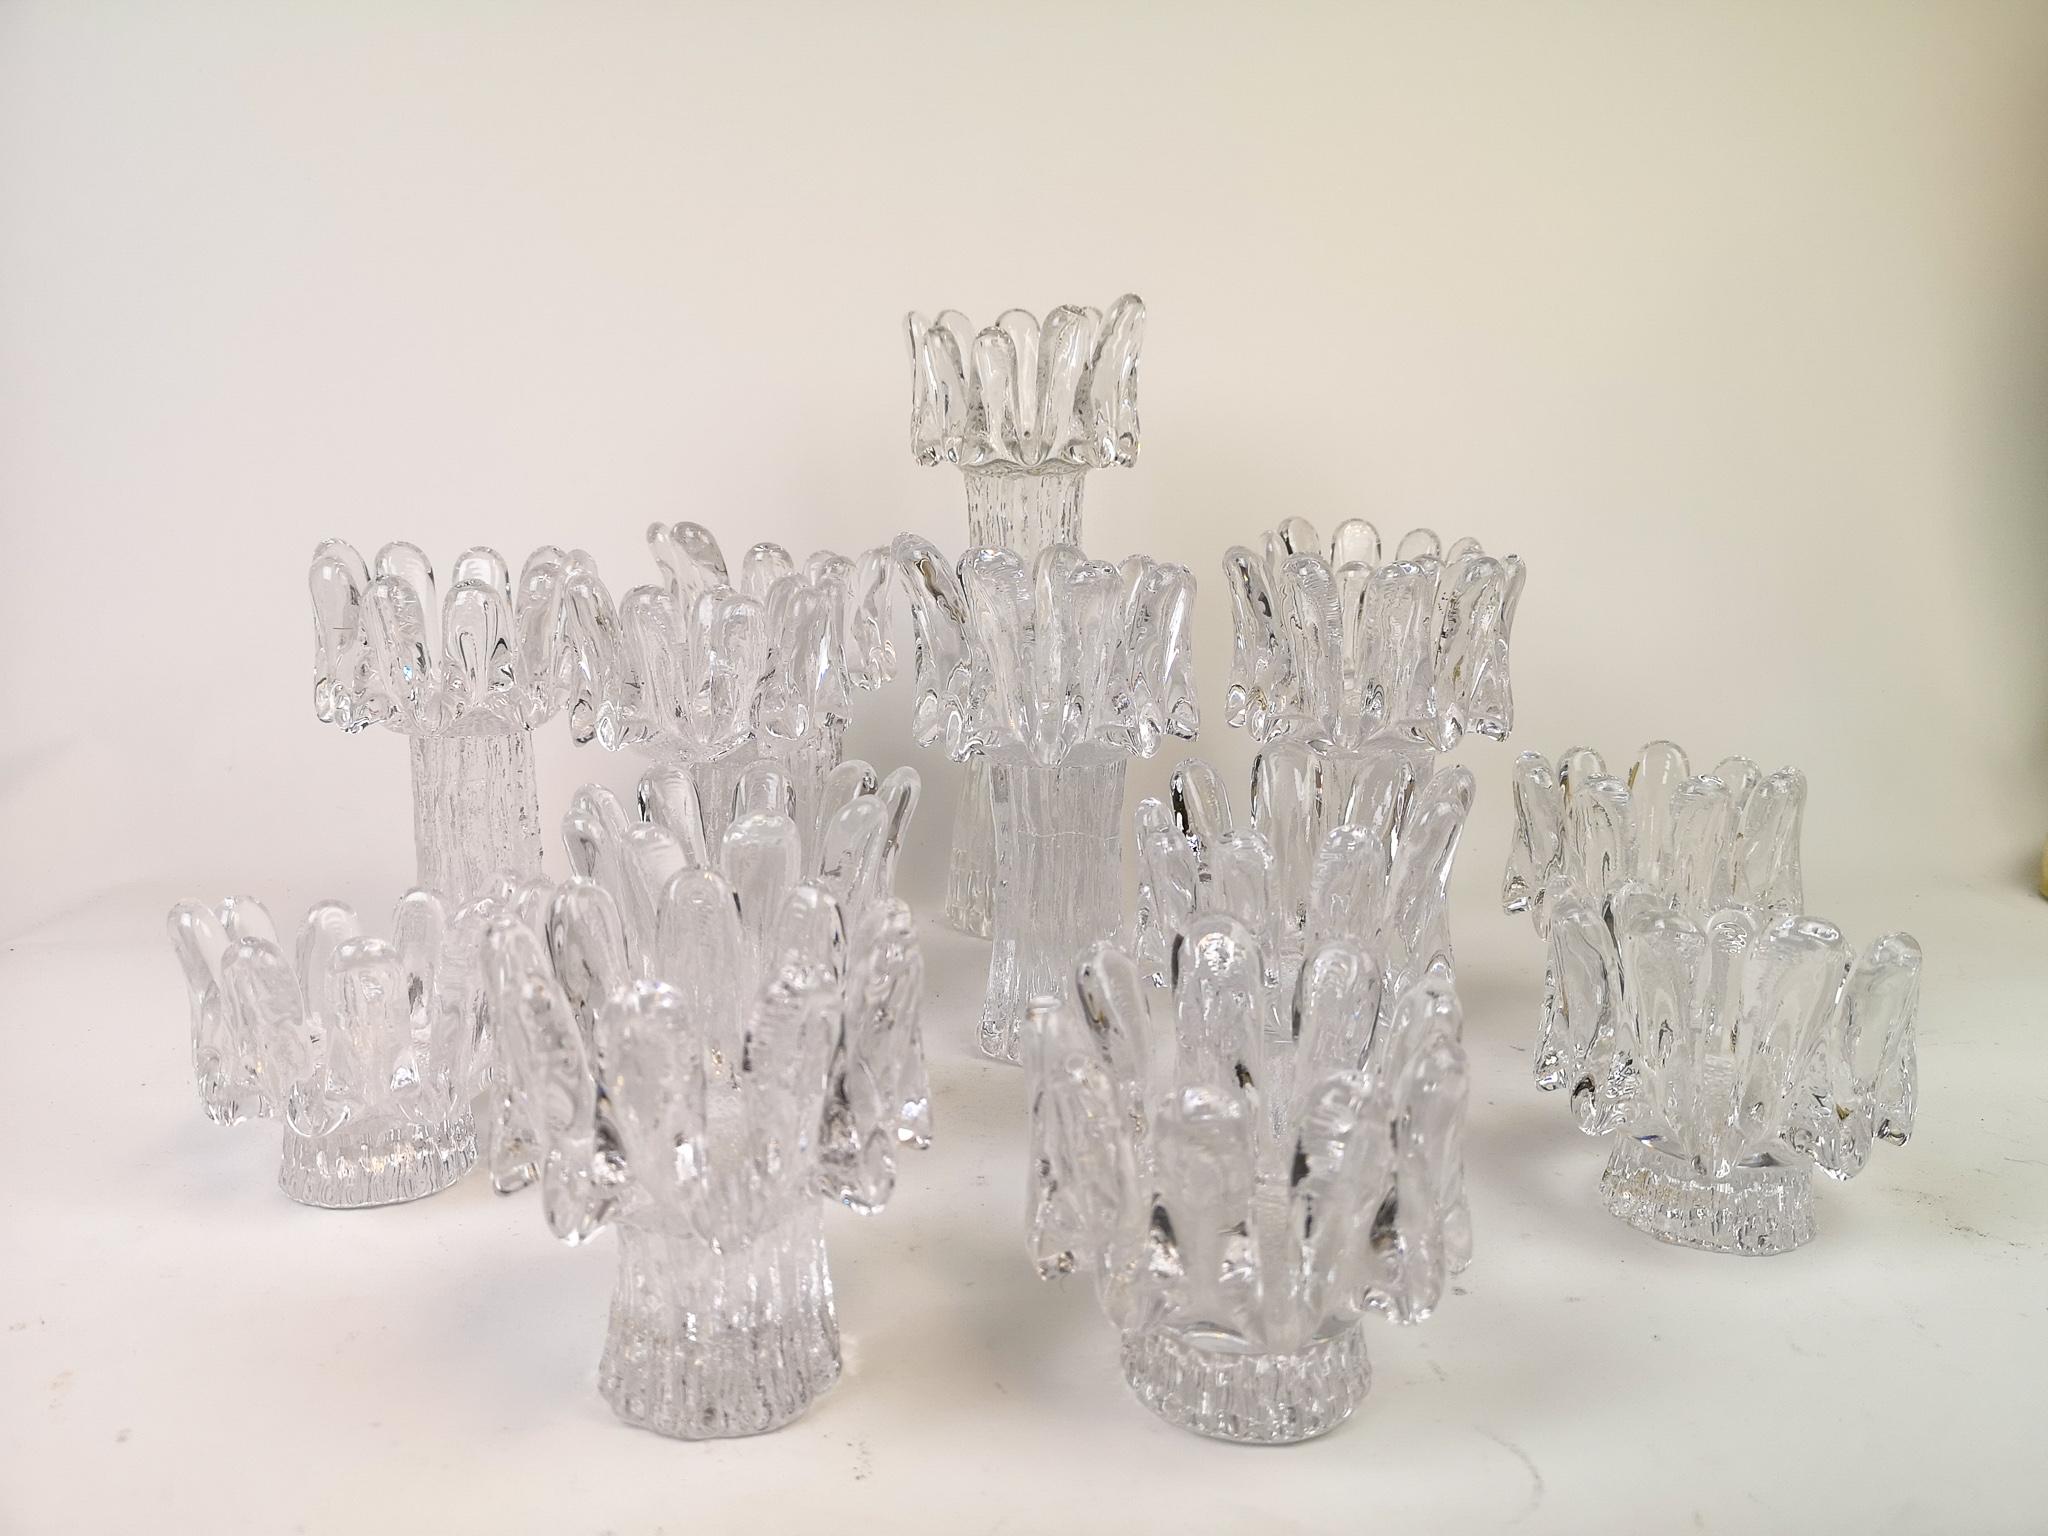 A nice set of 14 candlesticks from Kosta signed Göran Wärff and with the name Sunflower. Nice set of 14 candlestick holders handmade in the Kosta factory. Together as a group this set makes a wonderful edition to any kind of room.

The high one H